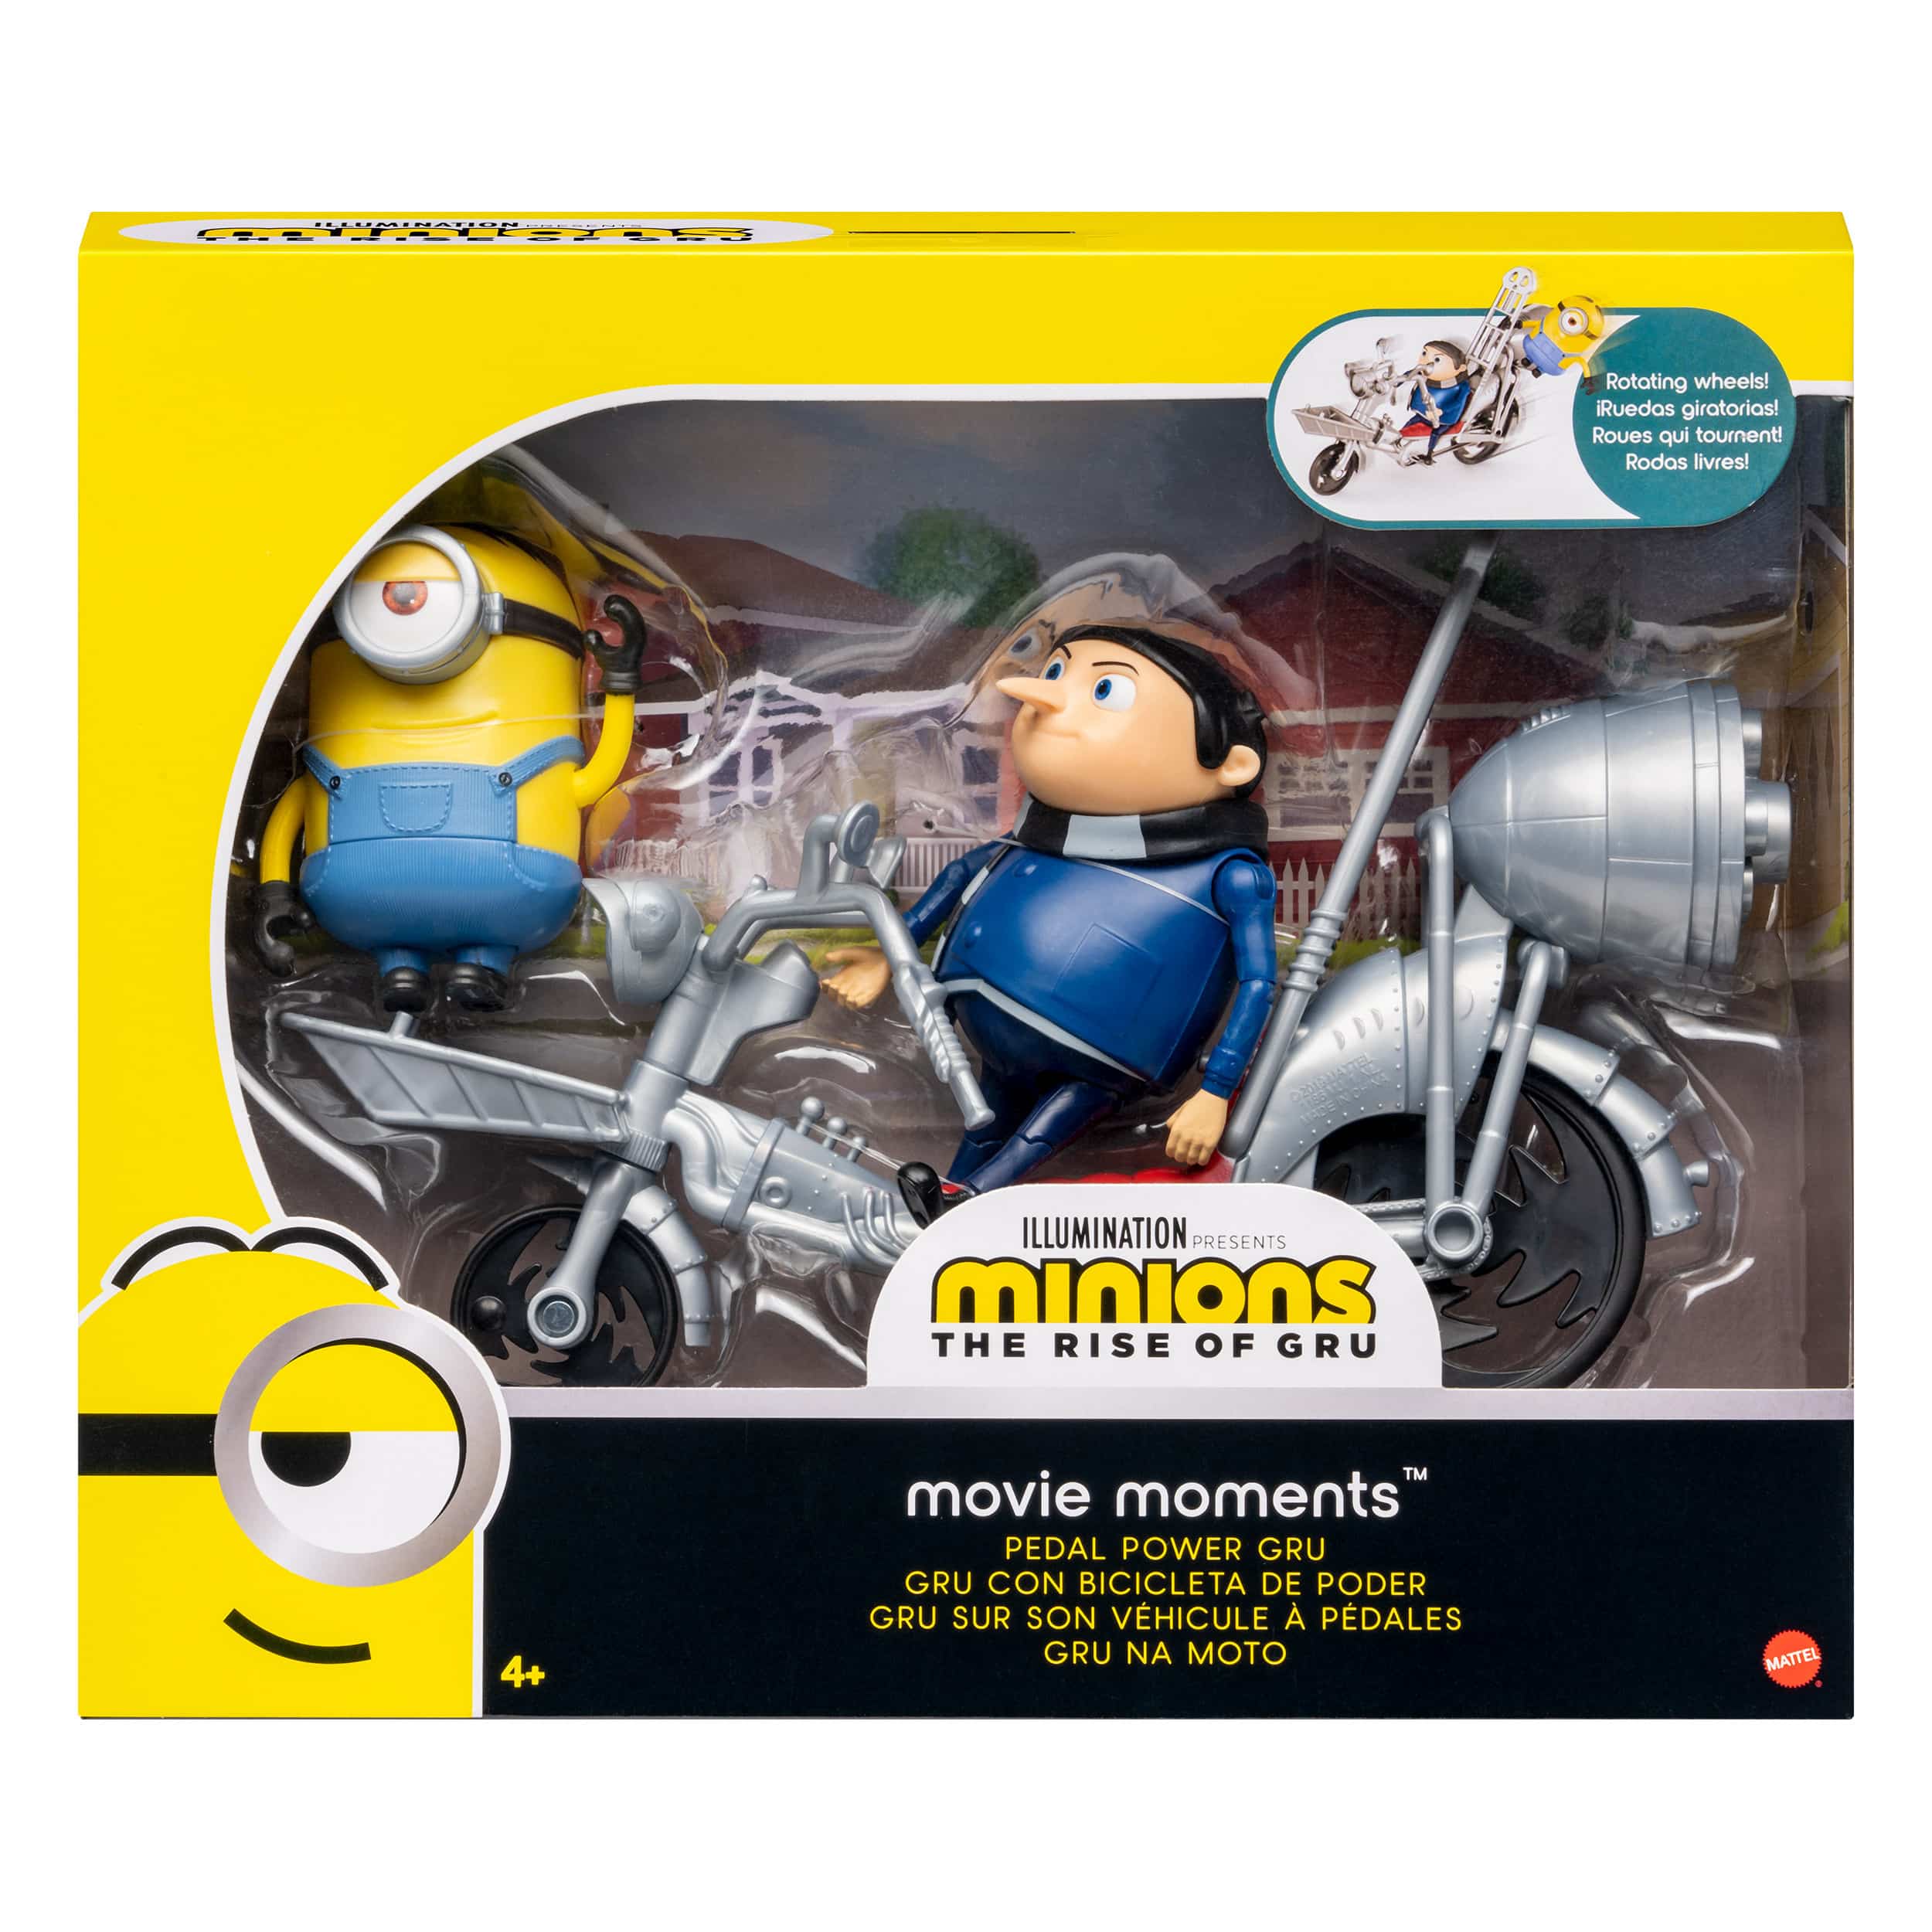 Minions The Rise of Gru - Movie Moments - Pedal Power Gru Pack